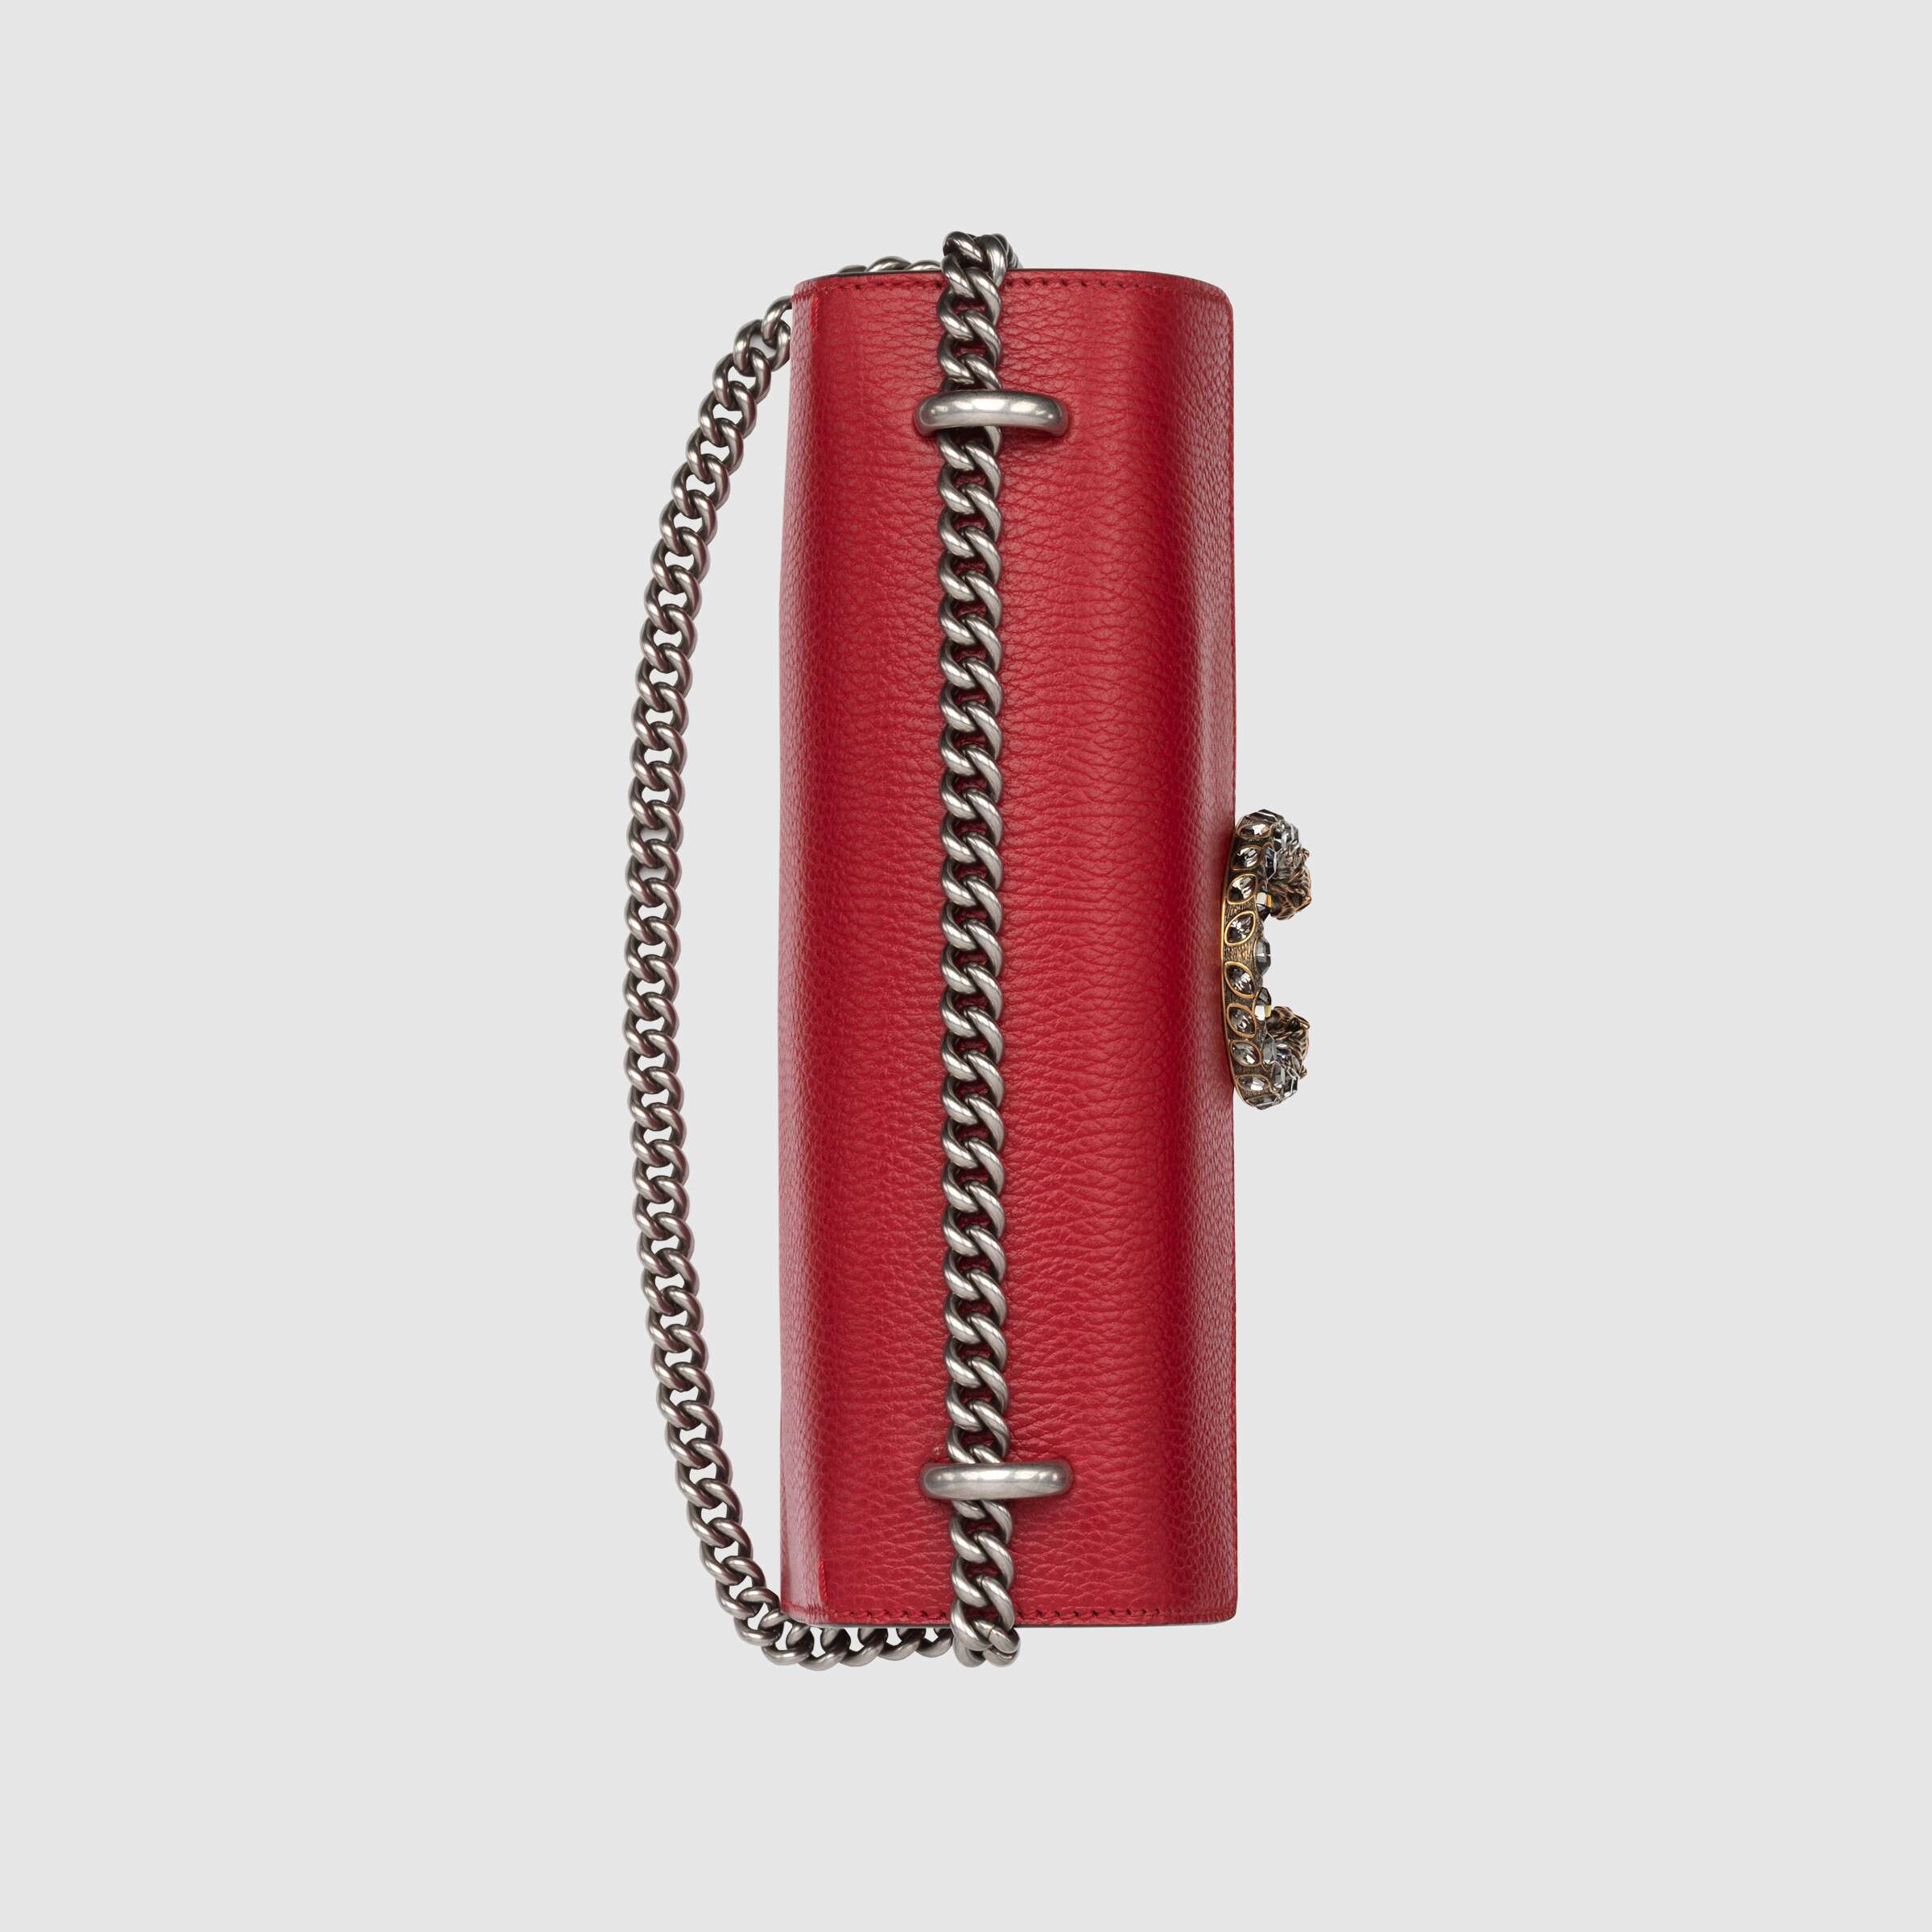 Gucci Dionysus Small Shoulder Bag Hibiscus Red Leather